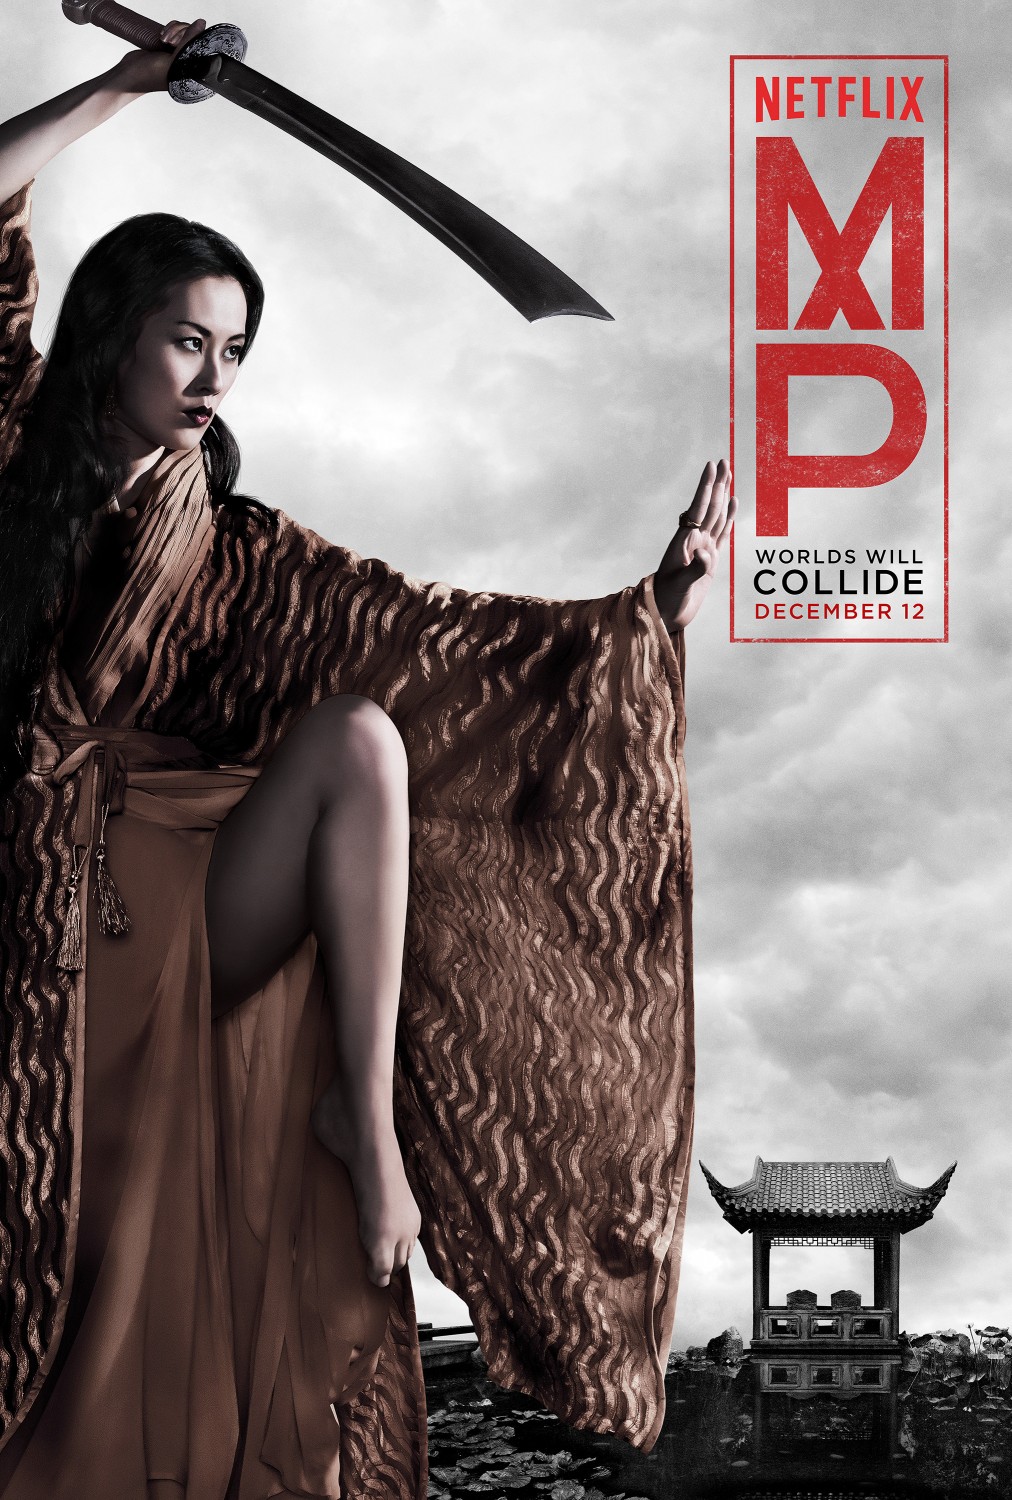 Extra Large TV Poster Image for Marco Polo (#8 of 12)